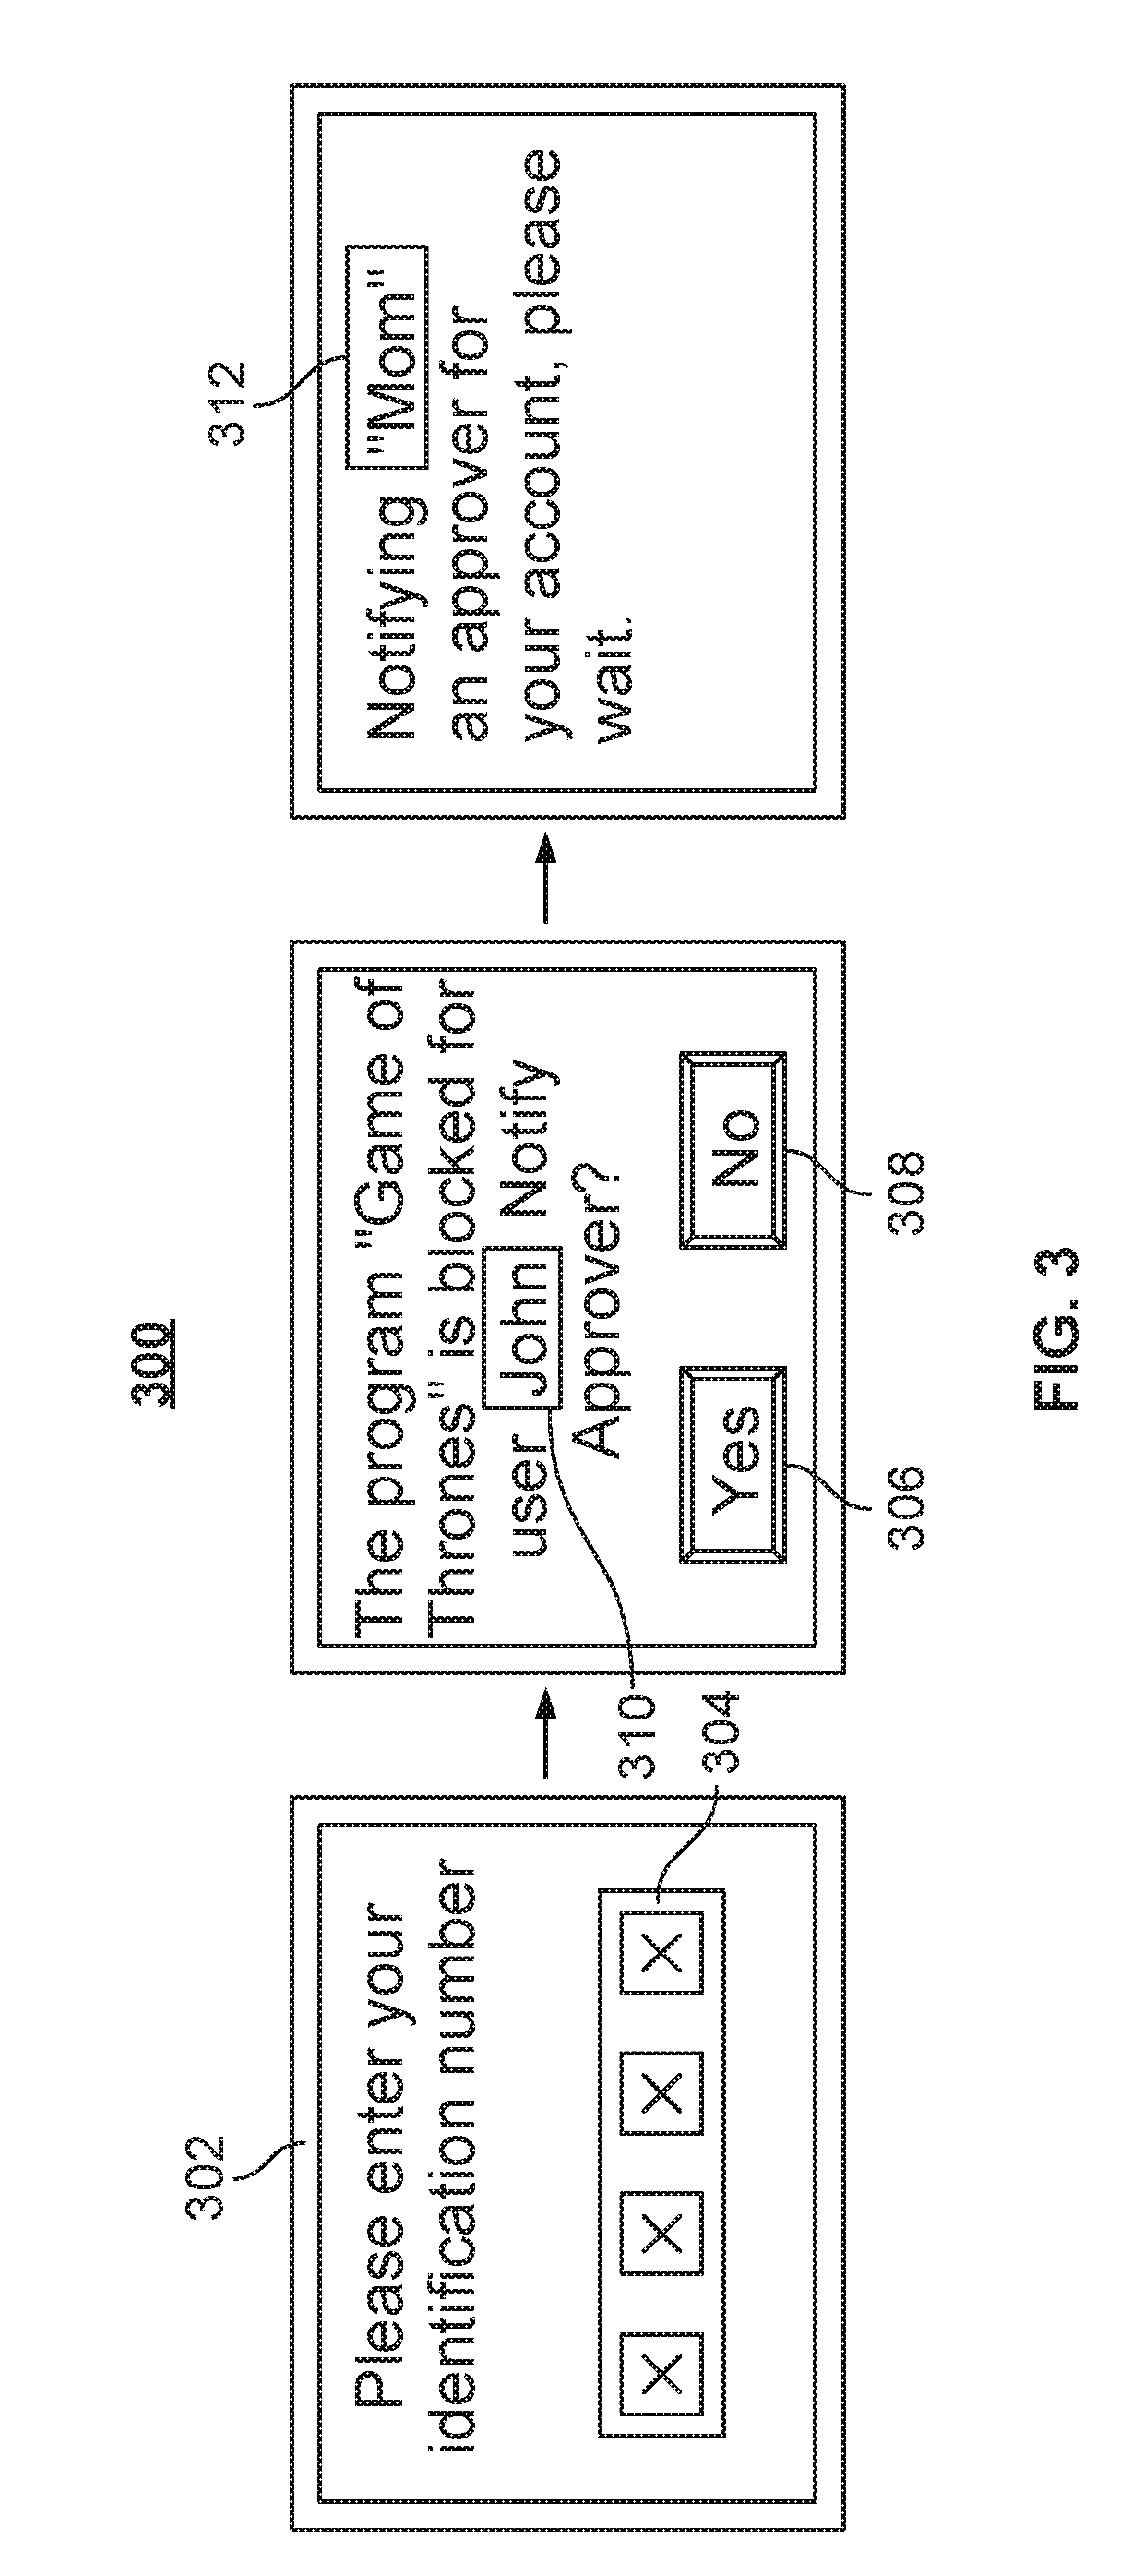 Systems and methods for allowing a user to access blocked media